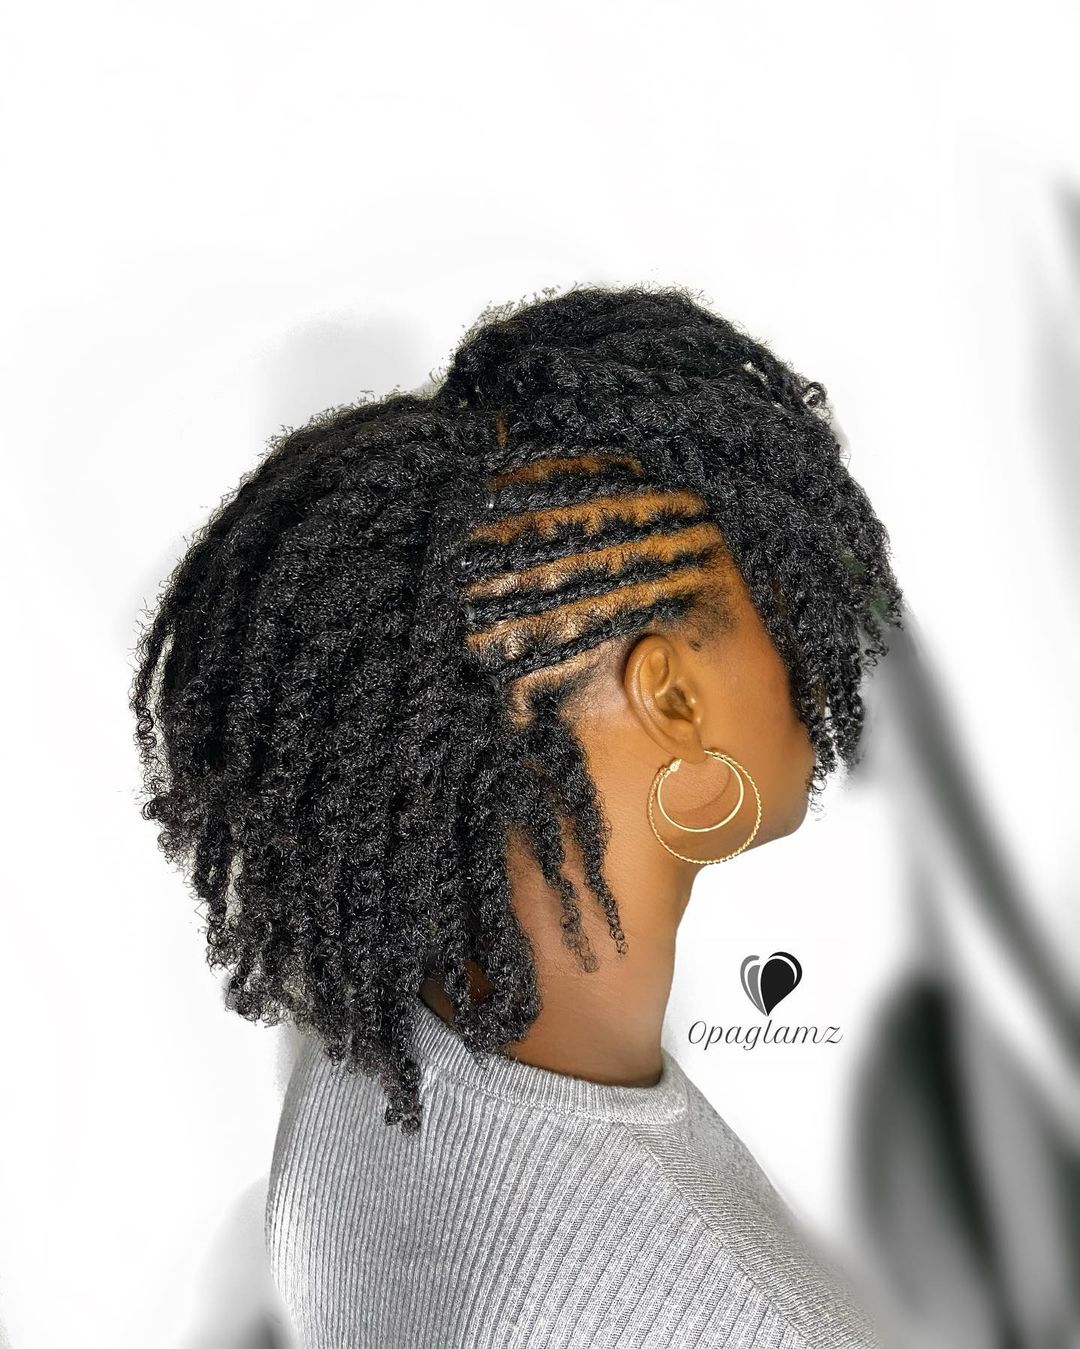 Black hairstyles for women NHP Approved 14